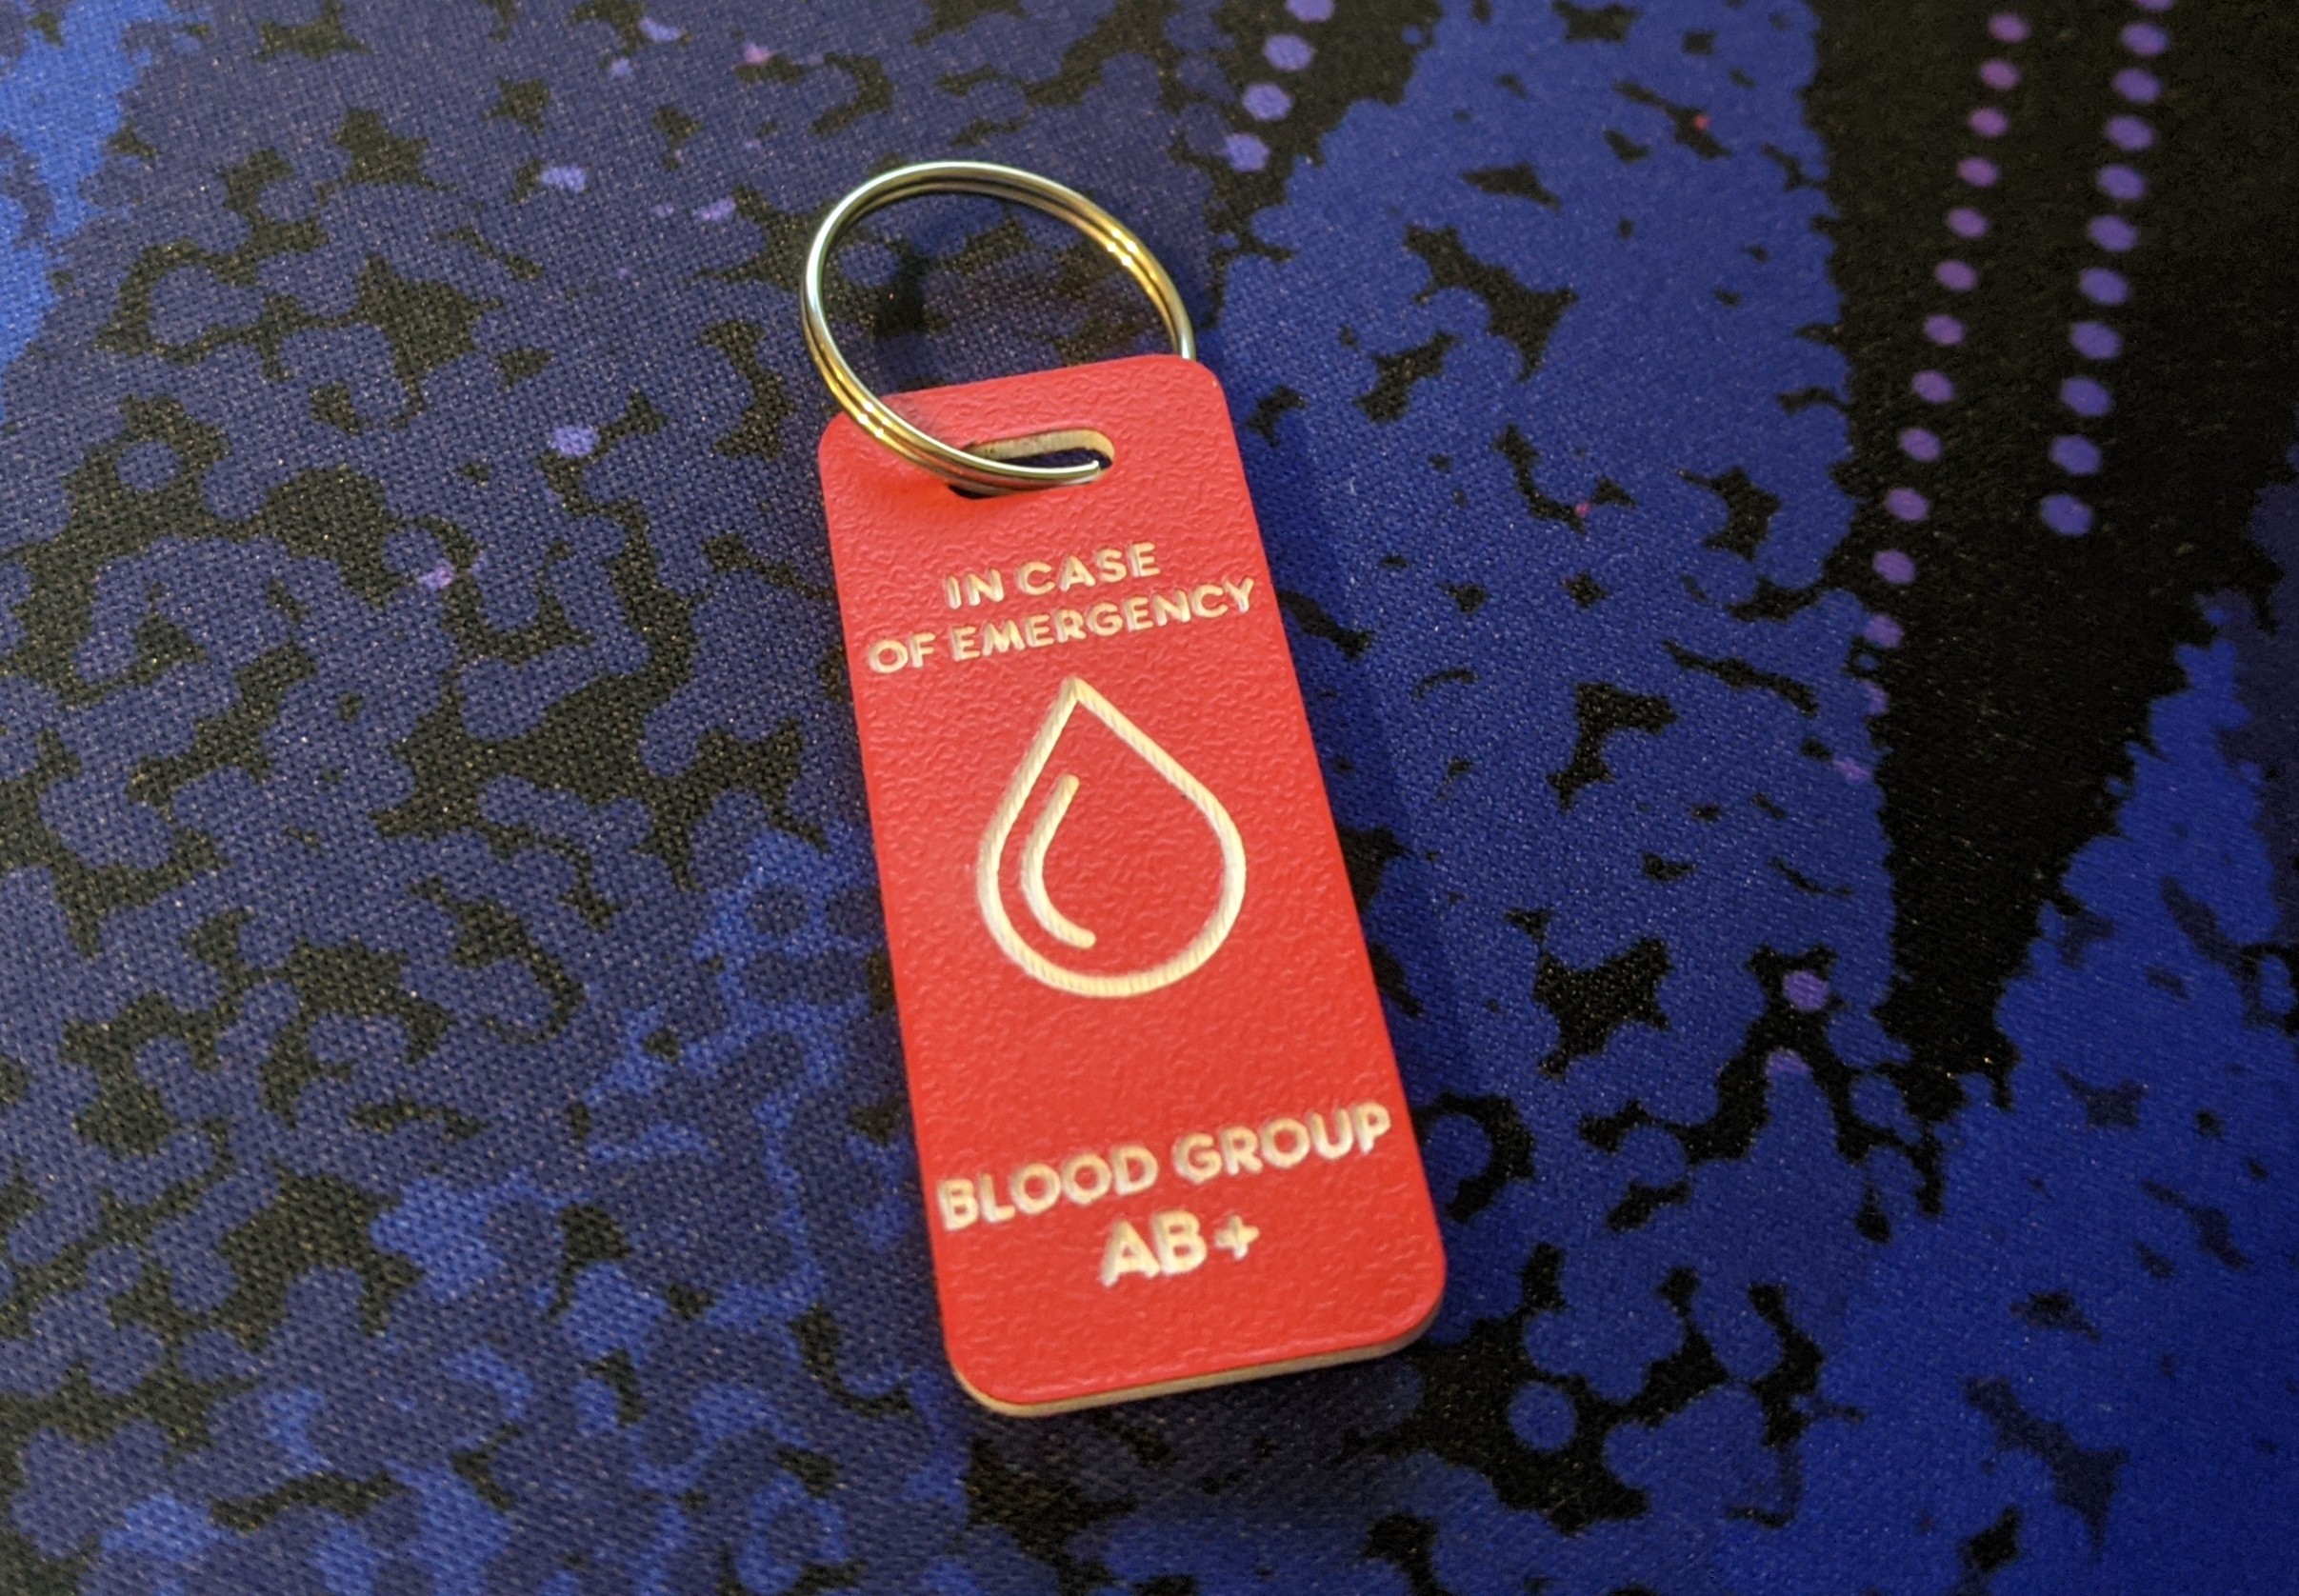 Red emergency tag, discreetly conveying critical medical information for effective emergency response